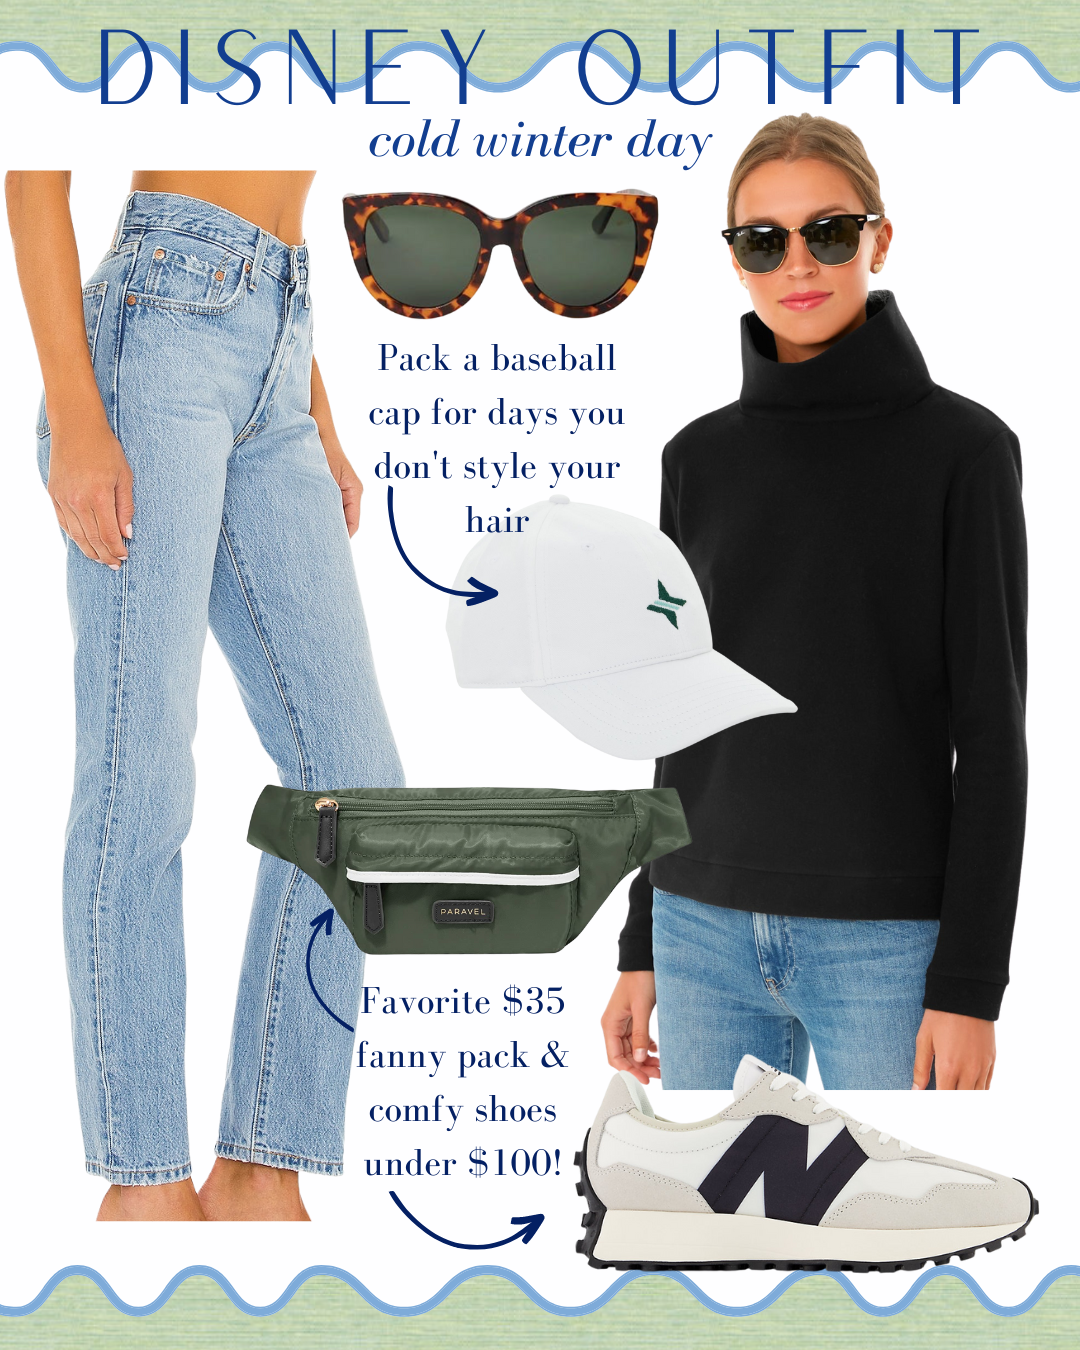 what to wear to Disney, women's black turtleneck outfit, classic women's winter outfits, Dudley Stephen's black fleece turtleneck, mom style, Disney World winter outfit, Disney World outfit for mom, green Paravel fanny pack, women's white baseball cap, white and black New Balance sneakers